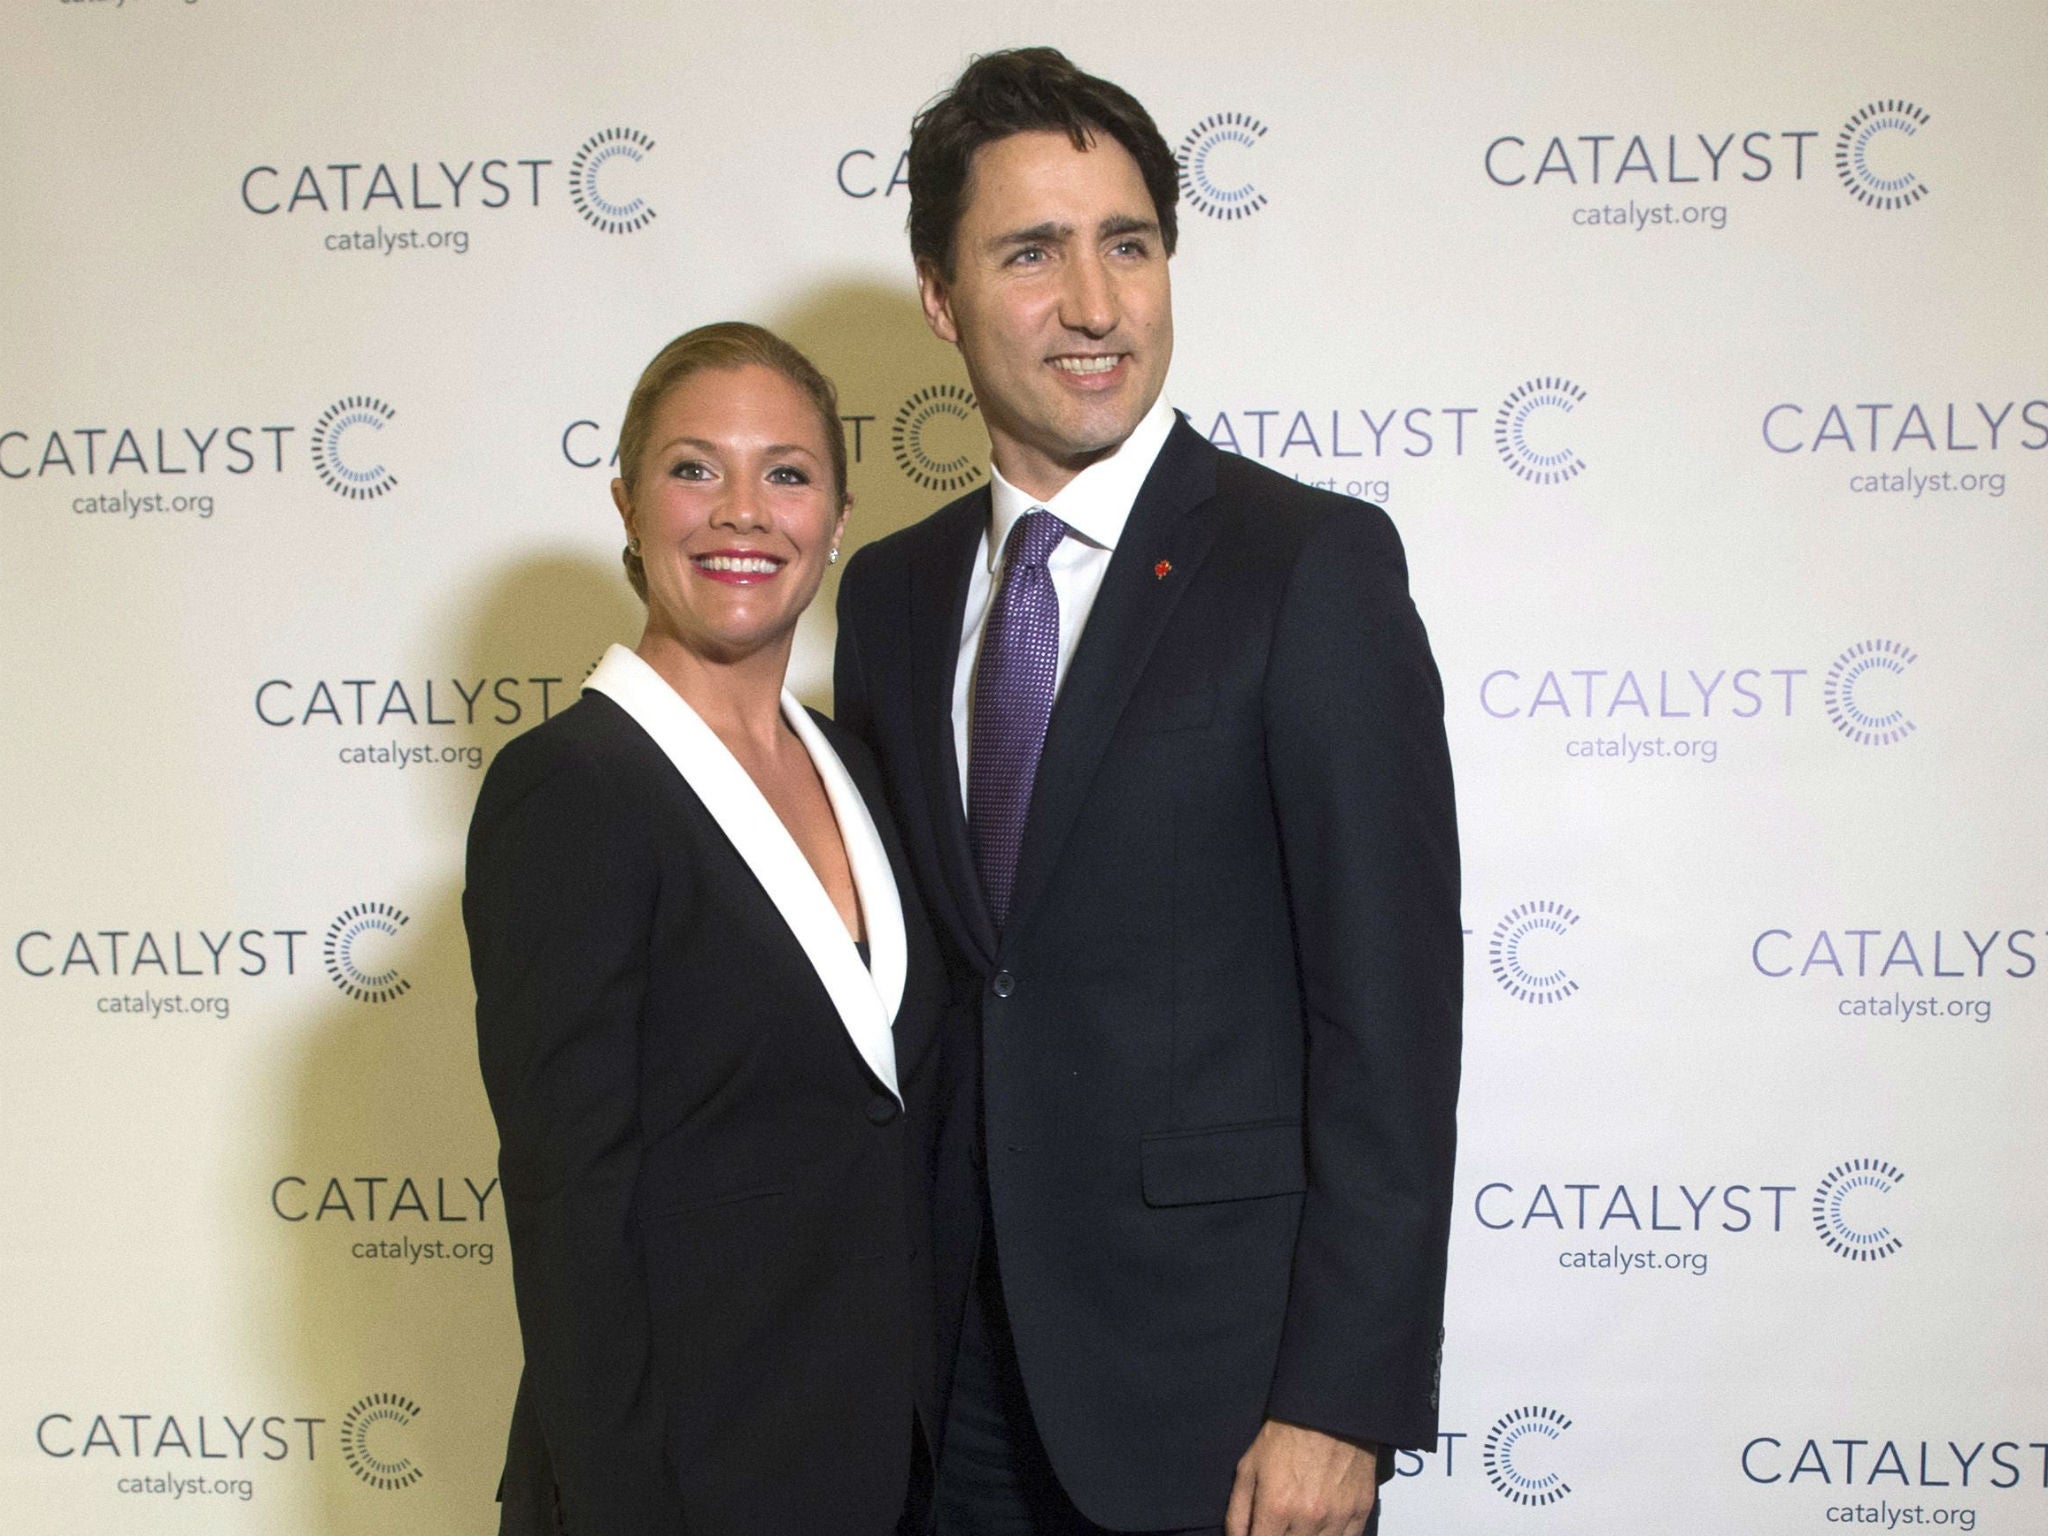 Mr Trudeau said his wife Sophie 'inspired him every day'